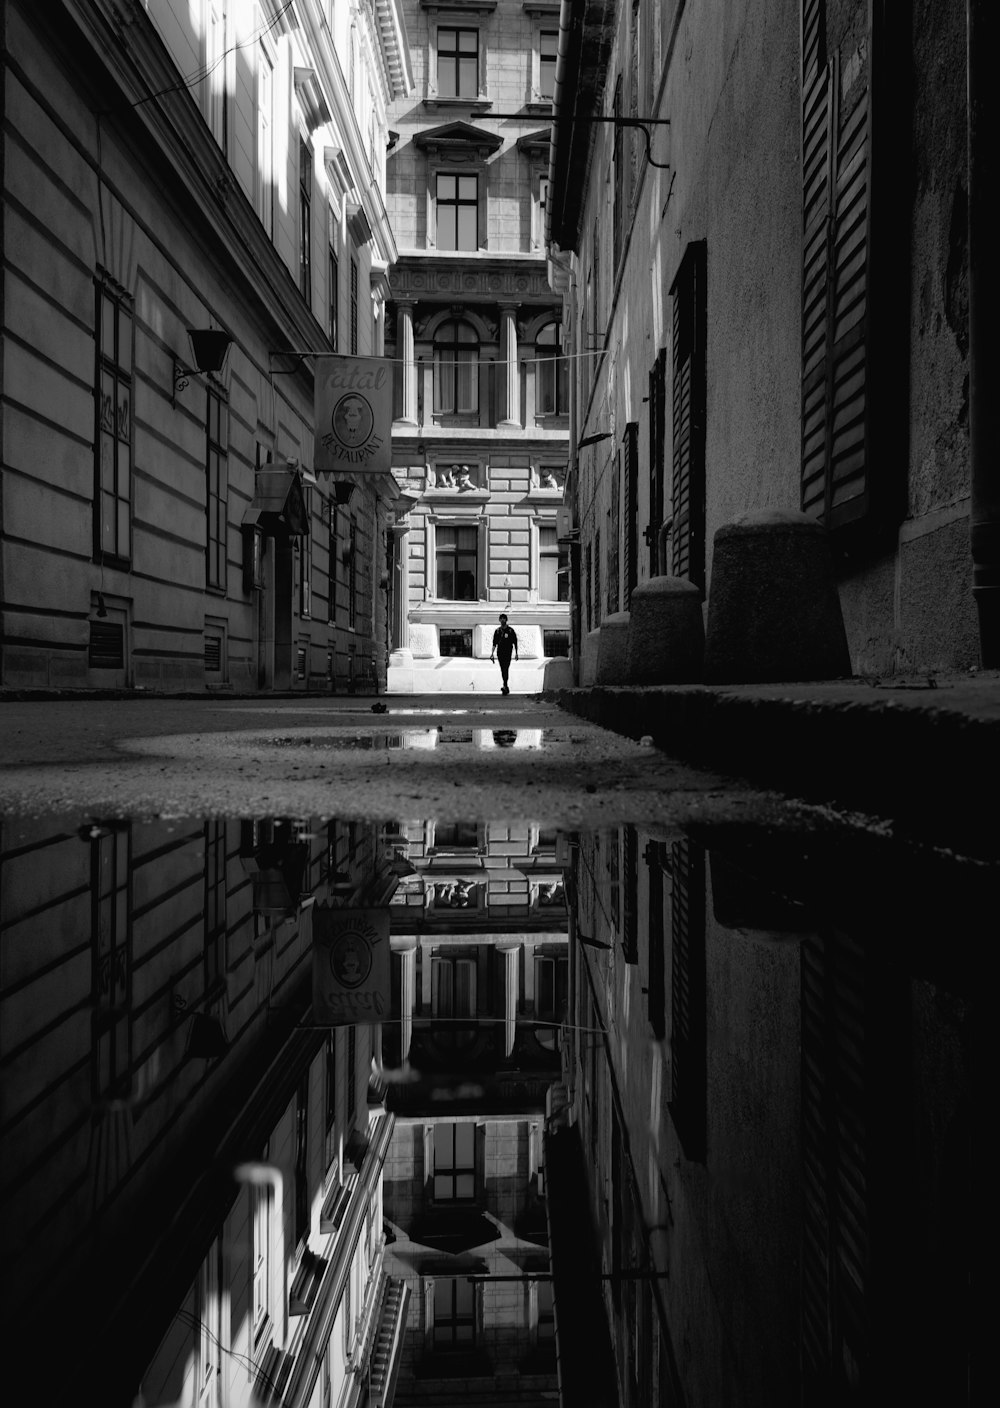 grayscale photo of man about to enter the pathway in between of buildings